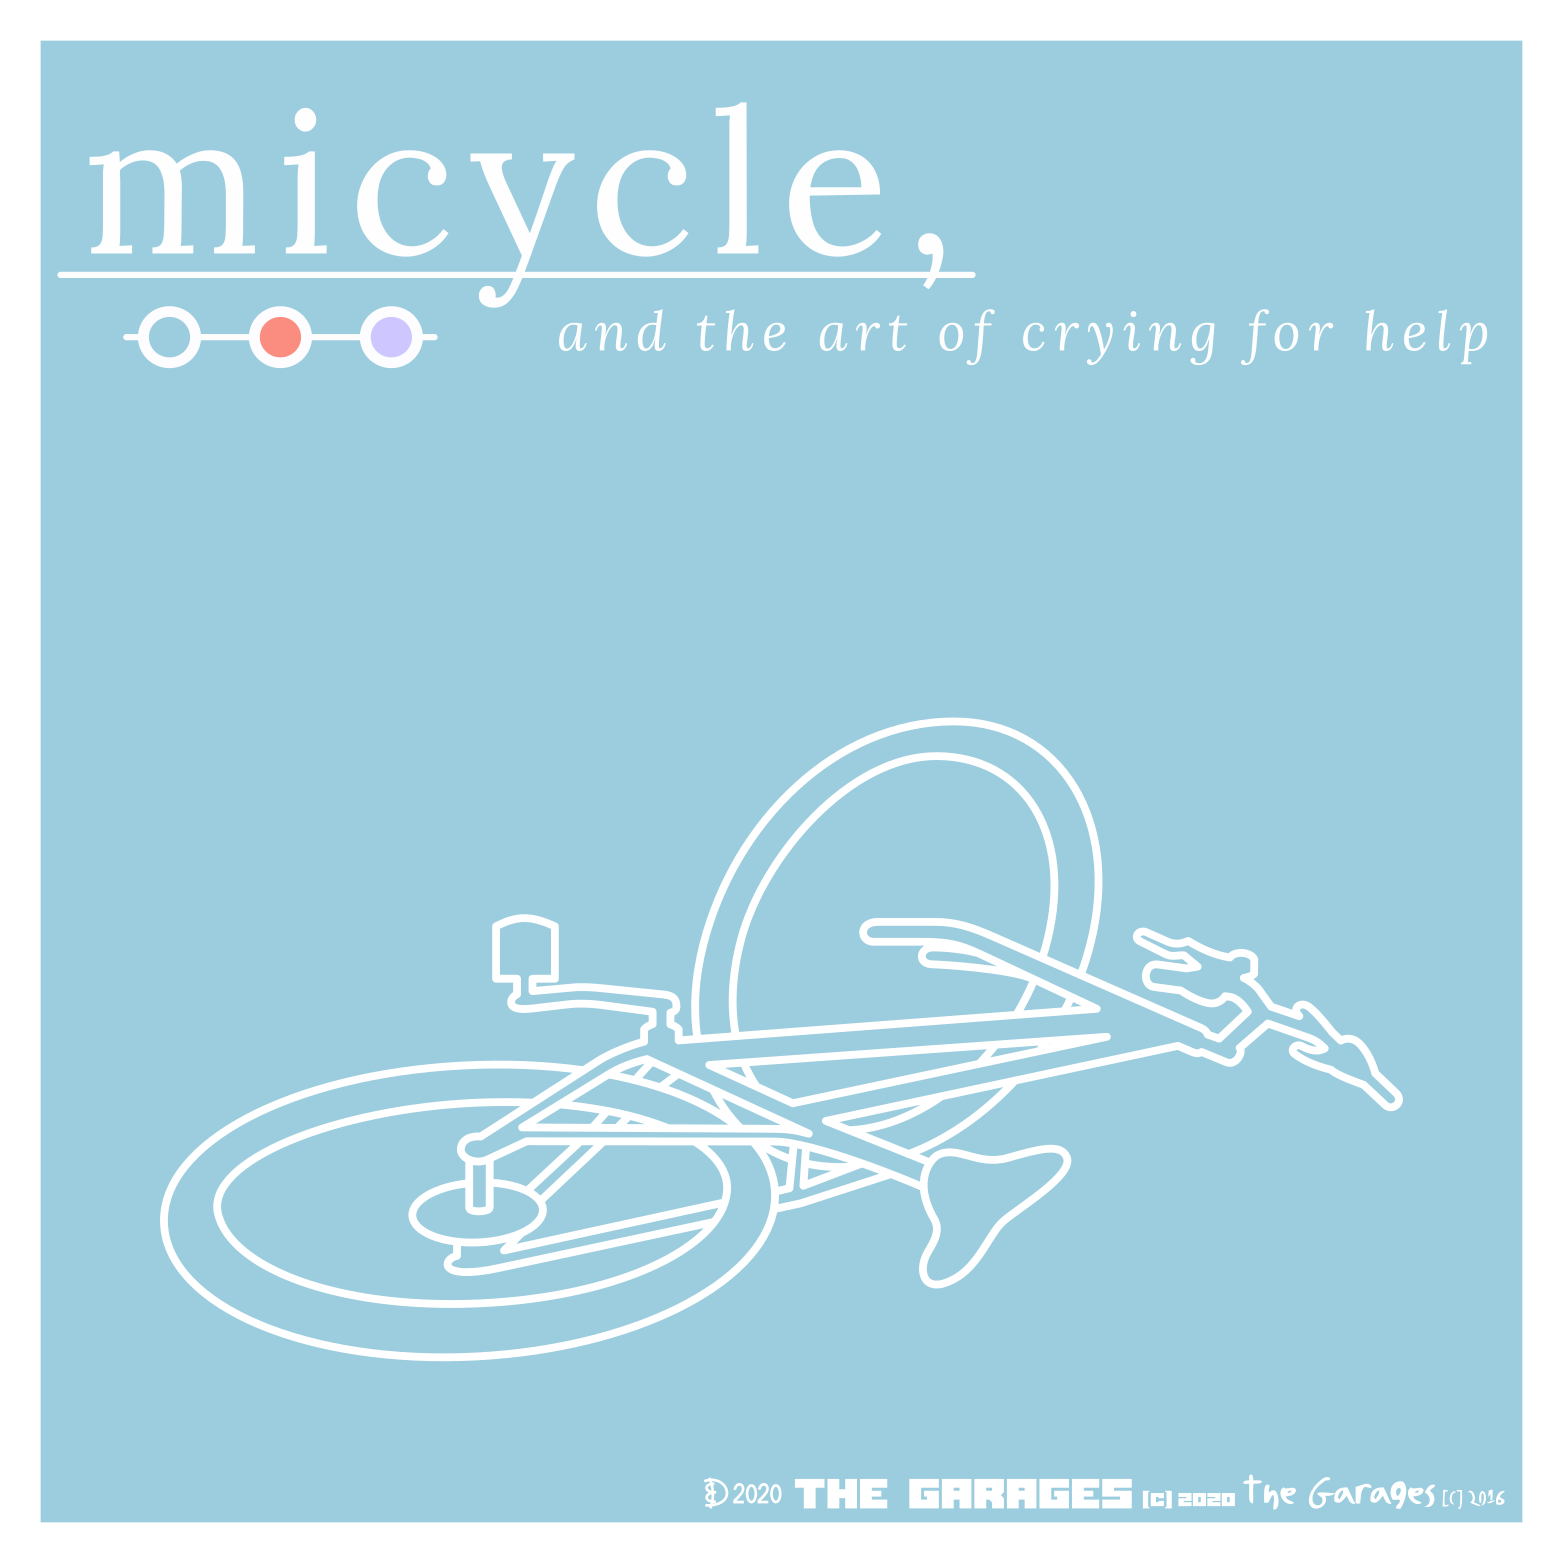 A line drawing of a bicycle that has fallen over, with title graphics above it.